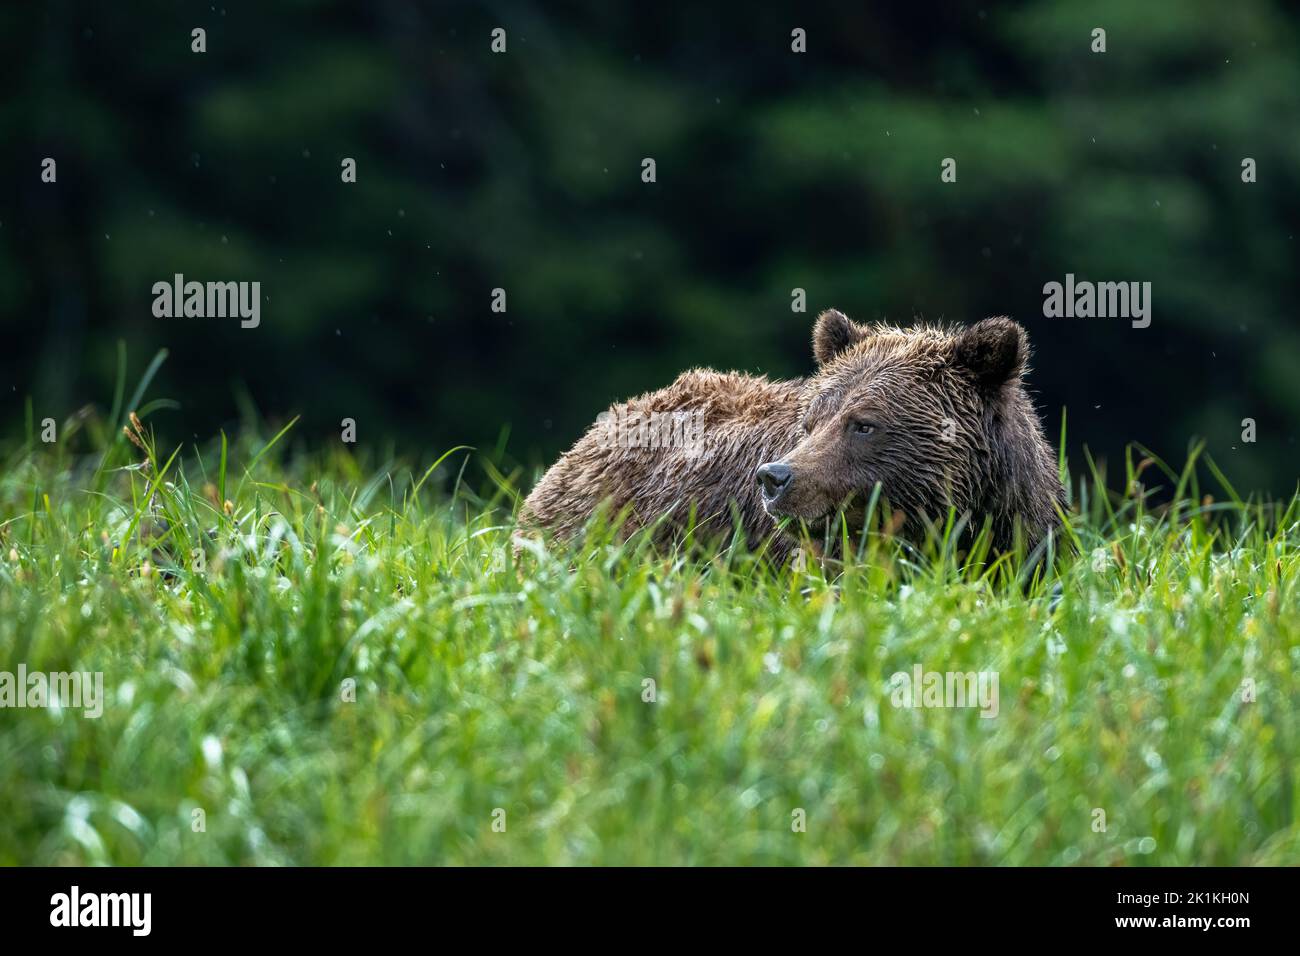 A female grizzly bear in tall sedge grasses in Canada's Great Bear Rainforest Stock Photo